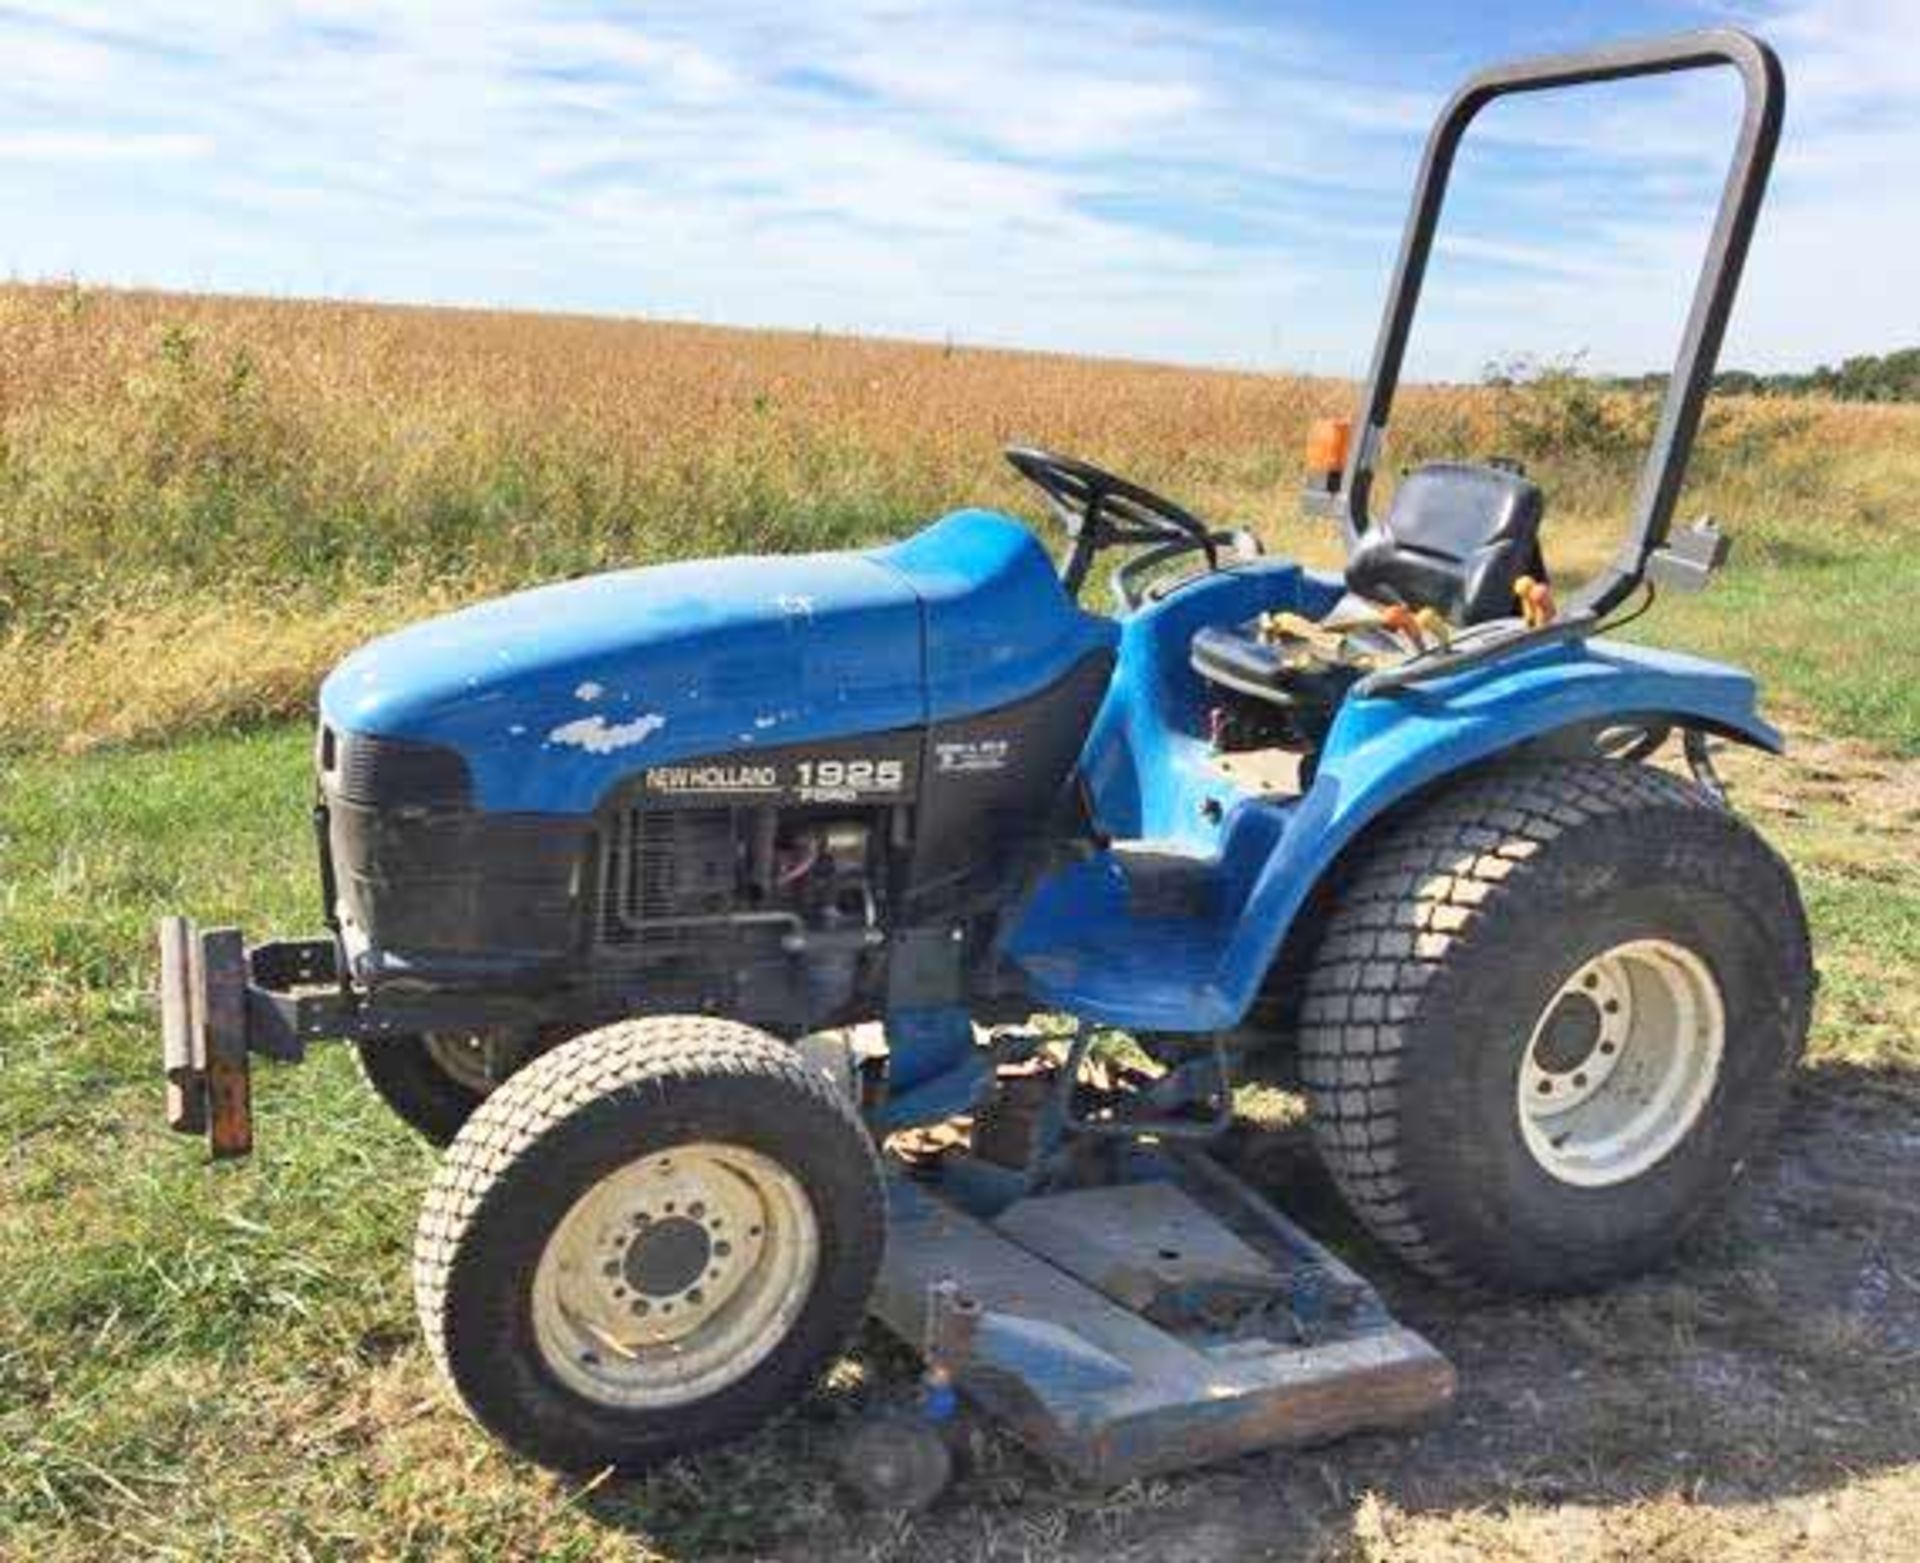 1998 NEW HOLLAND 1925 TRACTOR, 4WD, 2380HRS, SER#G006032 with 1998 NEW HOLLAND 914A 6' MOWER DECK, - Image 2 of 5